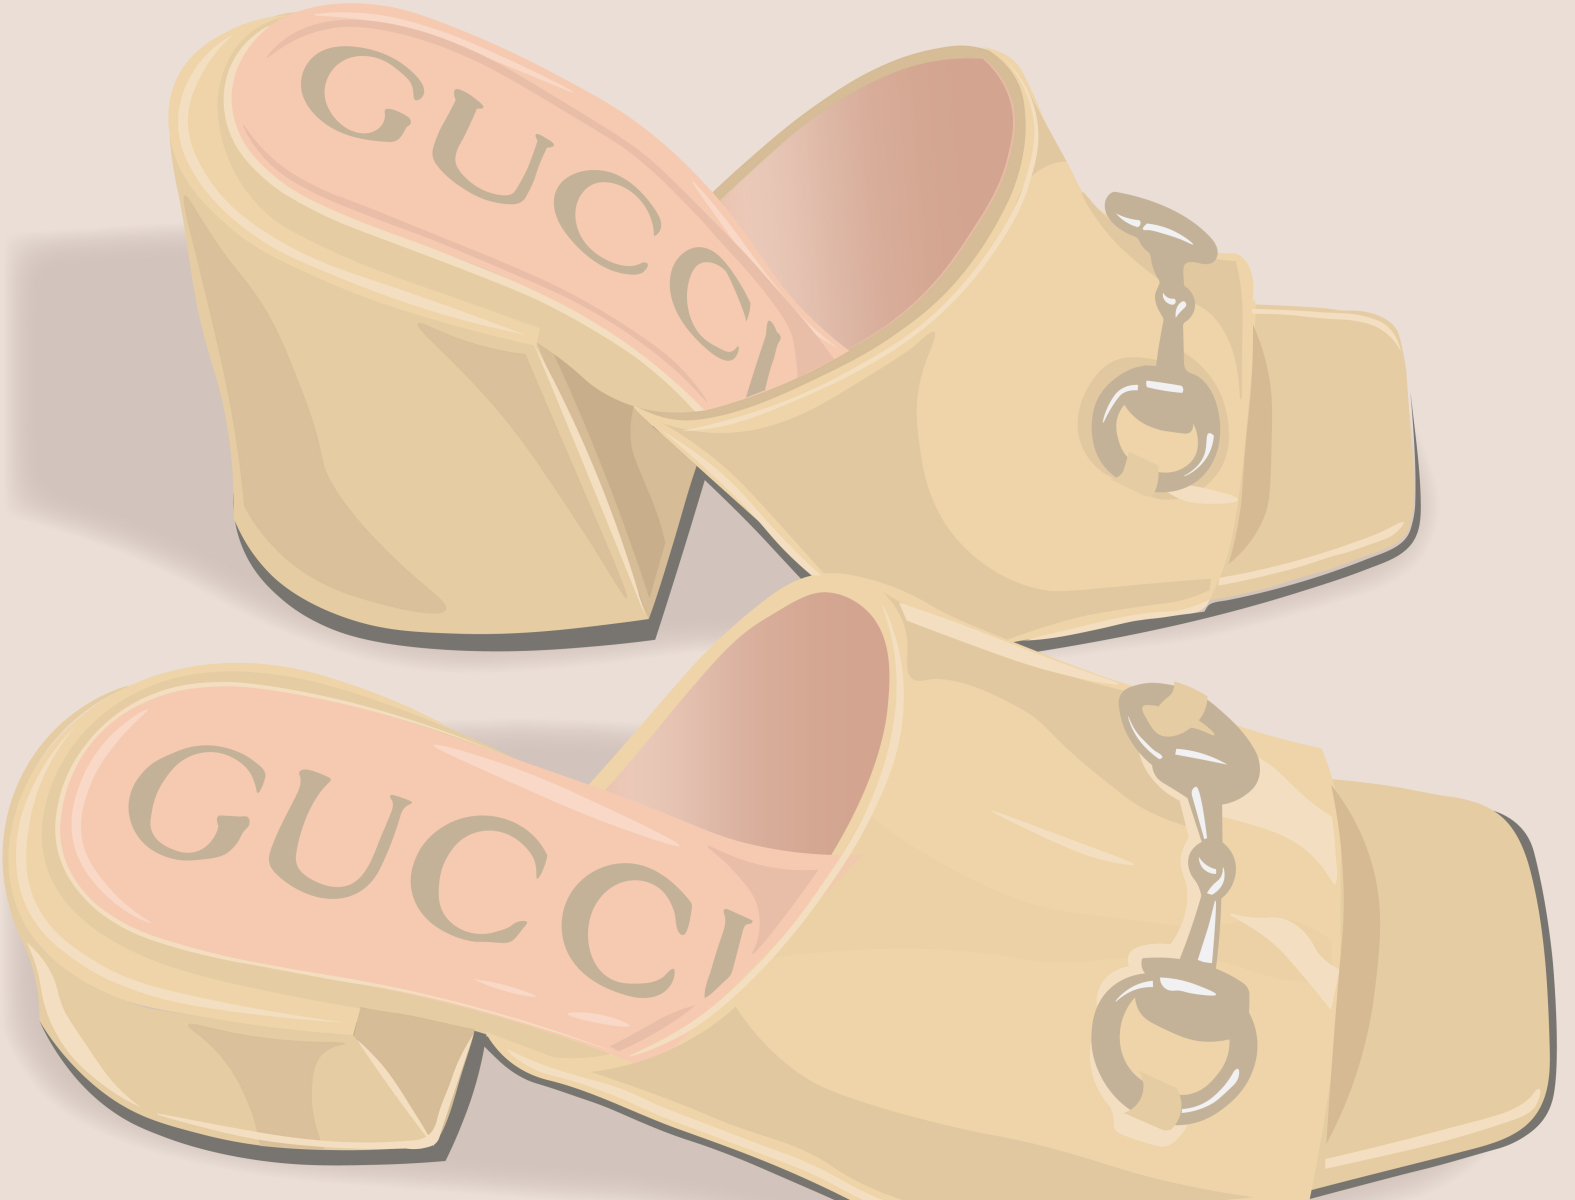 Gucci Shoes Illustration by Taylor Jacobs on Dribbble